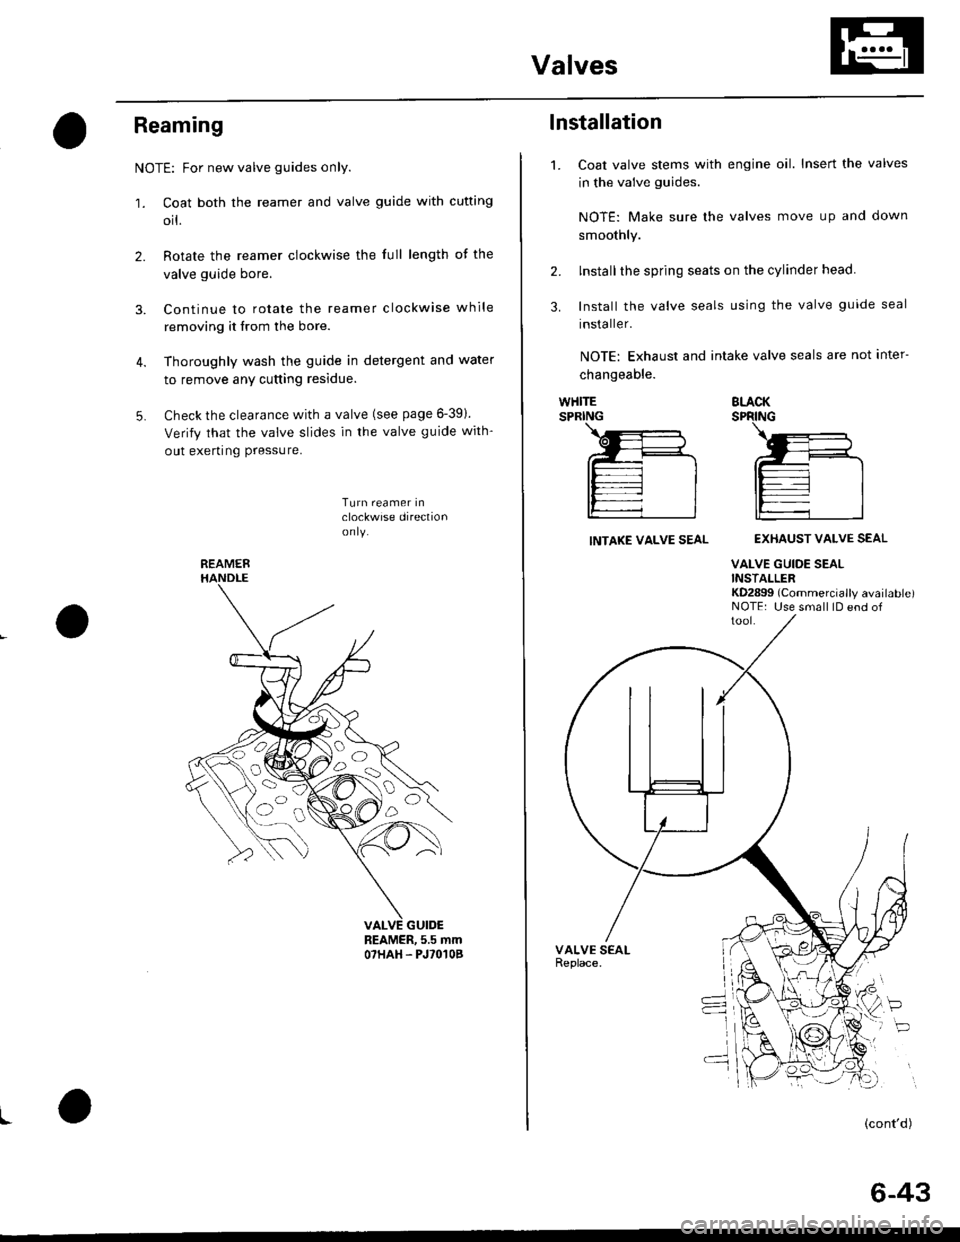 HONDA CIVIC 1999 6.G Workshop Manual Valves
Reaming
NOTE: For new valve guides only.
1. Coat both the reamer and valve guide with cufting
orl.
2. Rotate the reamer clockwise the full length of the
valve guide bore.
3. Continue to rotate 